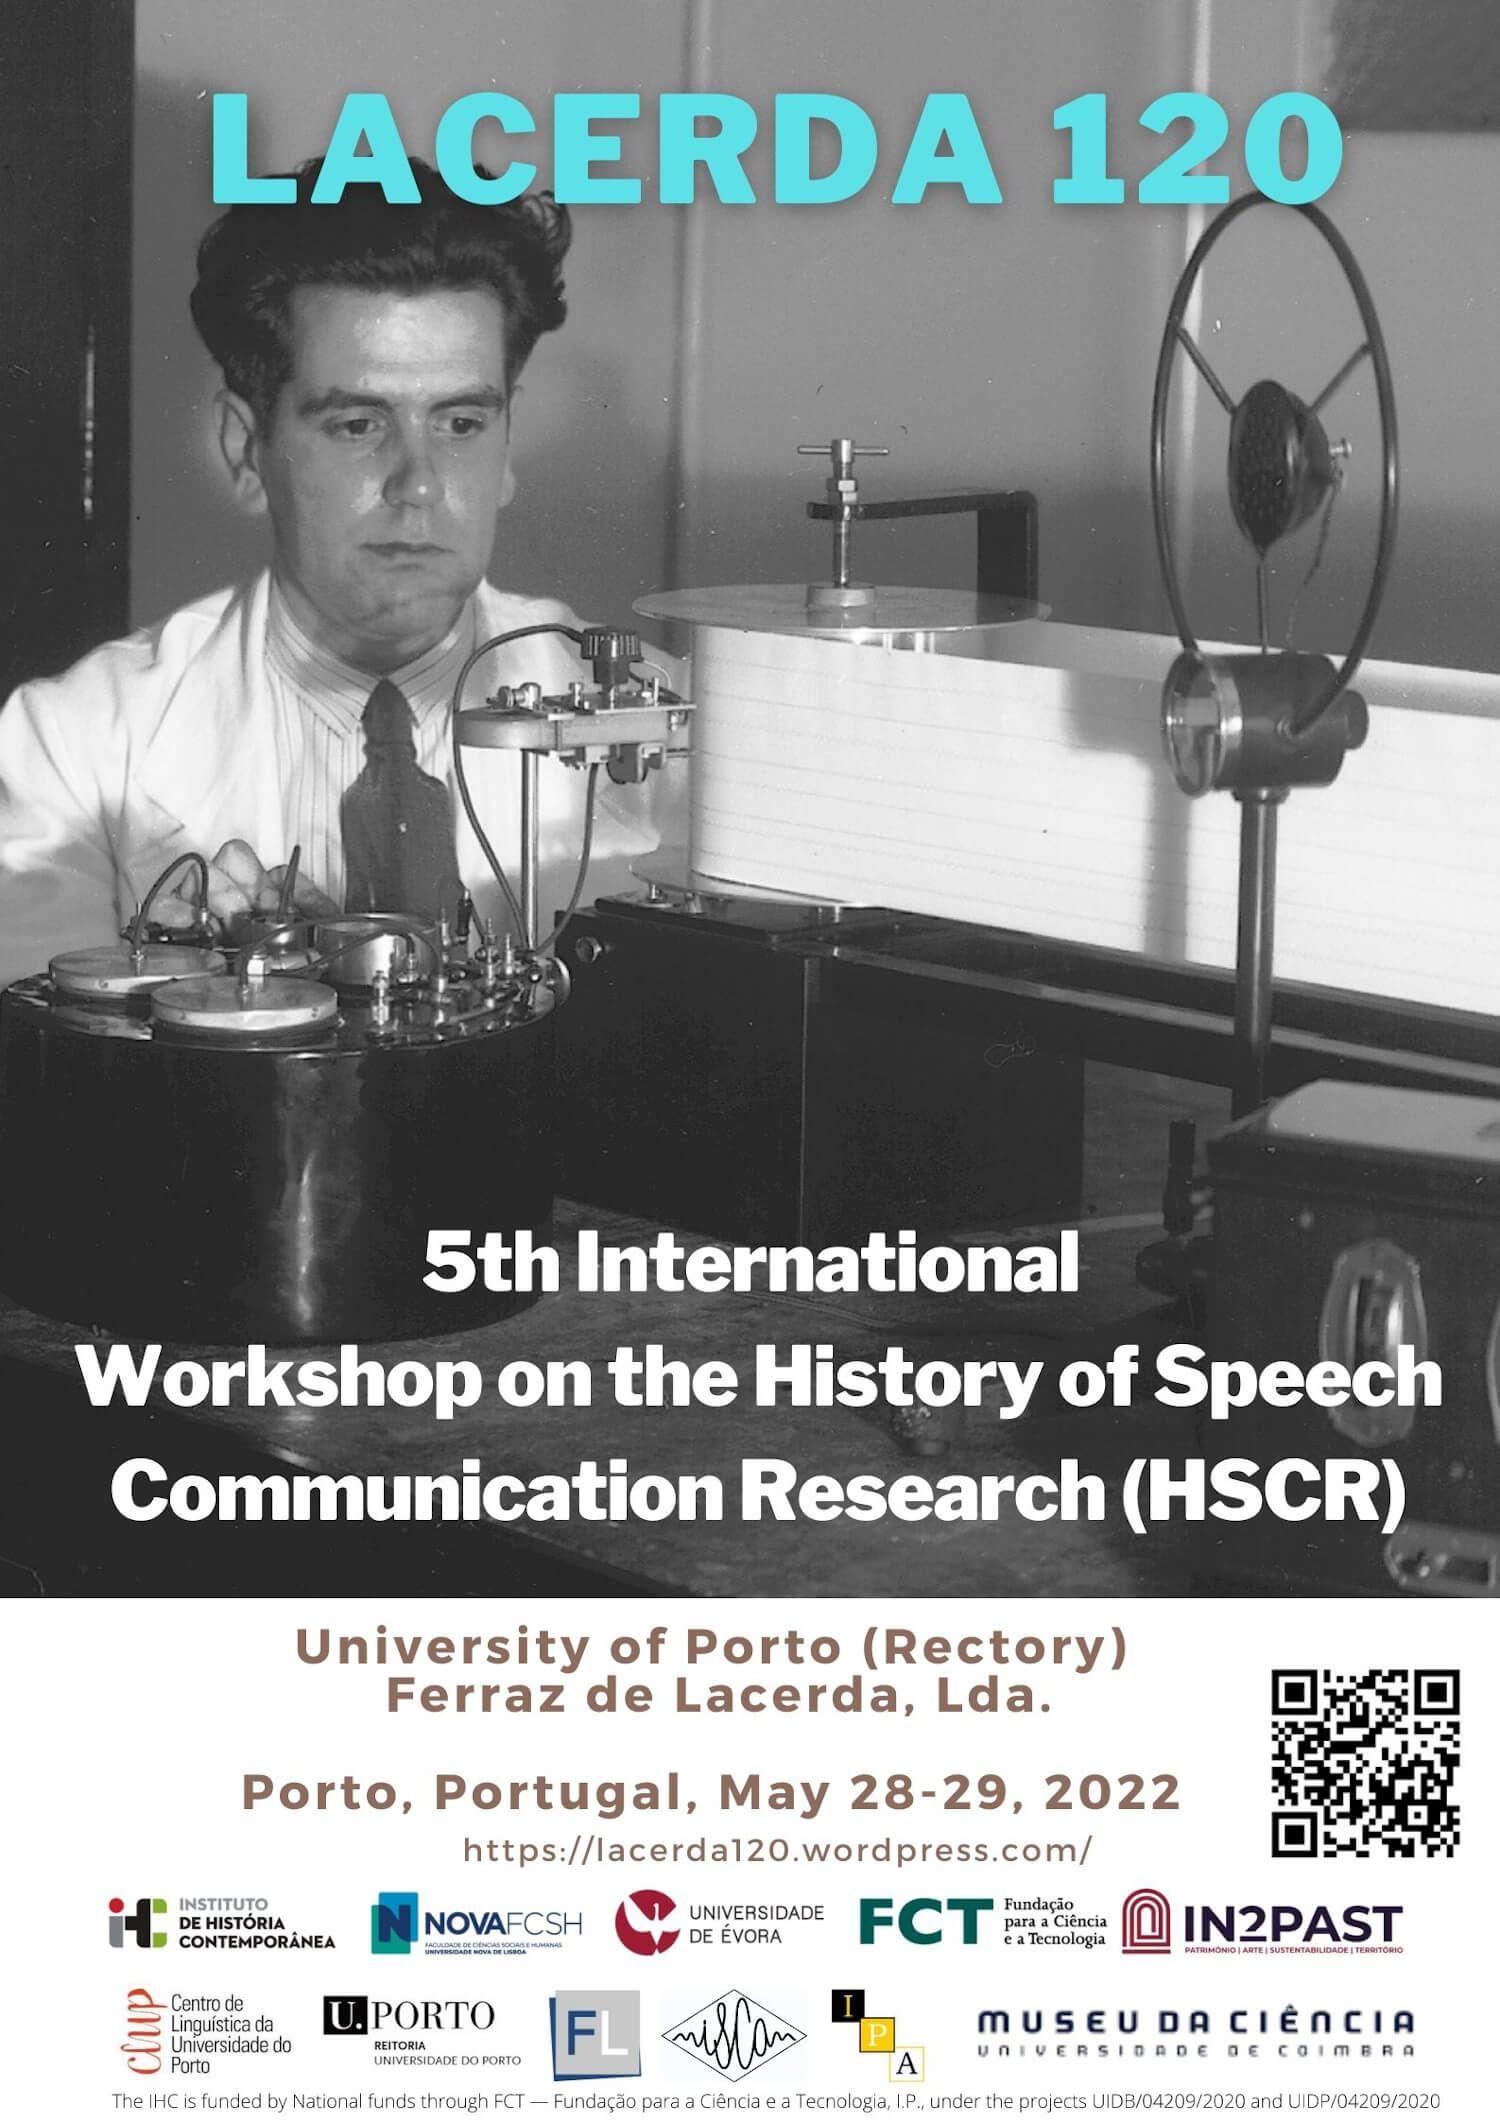 Poster for the 5th International Workshop on the History of Speech Communication Research 